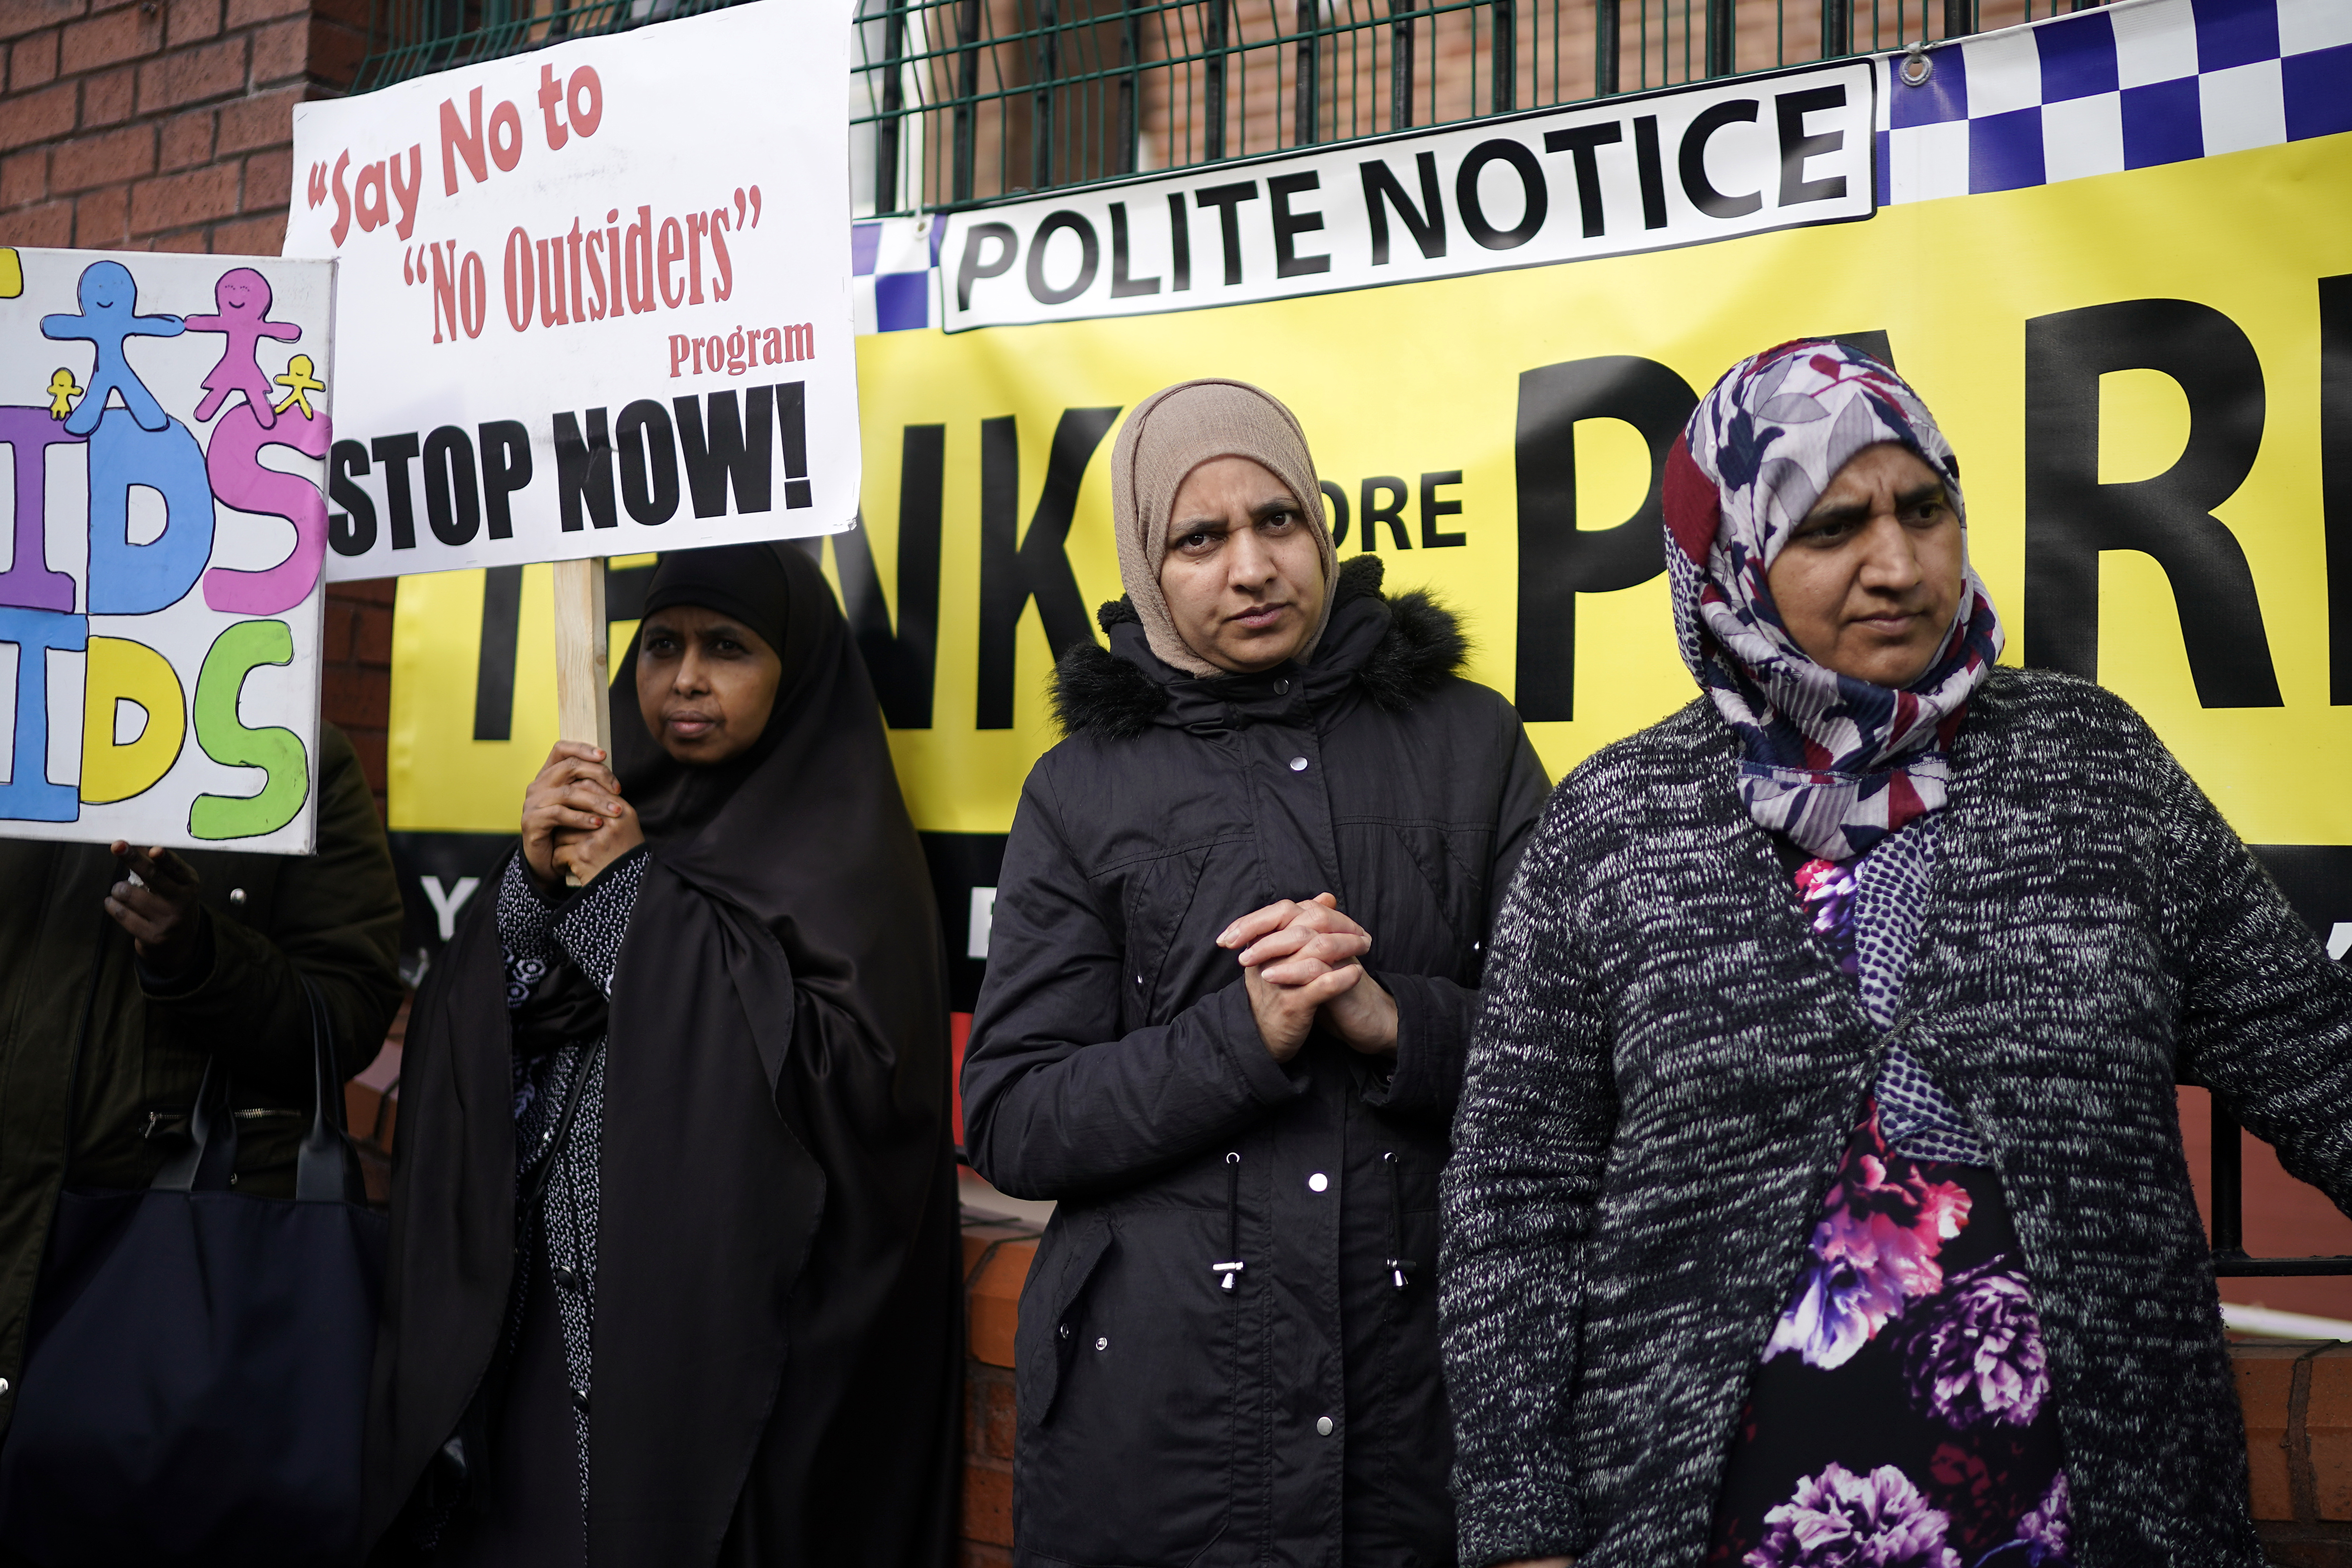 Parents, children and protestors demonstrate against the 'No Outsiders' programme, which teaches children about LGBT rights, at Parkfield Community School on March 21, 2019 in Birmingham, England. (Photo by Christopher Furlong/Getty Images)